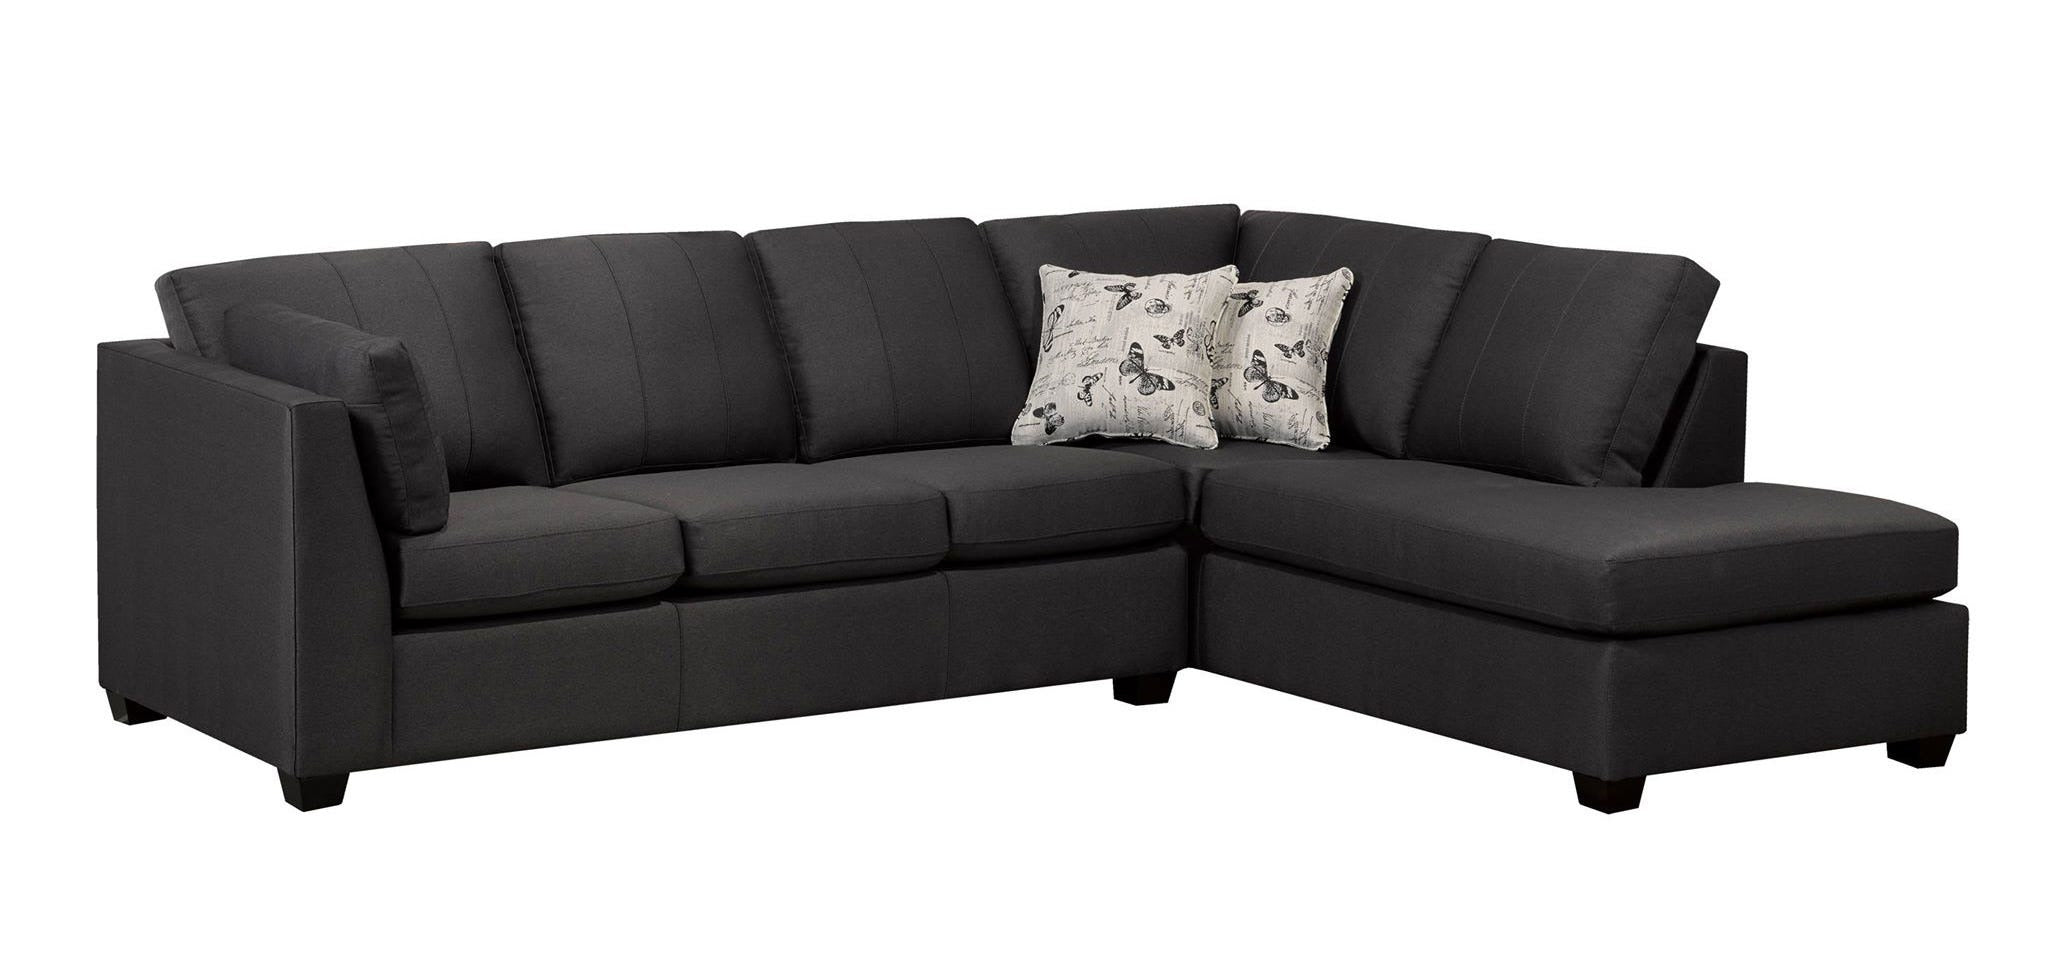 Canadian Made Stanley Dark Grey Fabric Sectional Sofa 9830